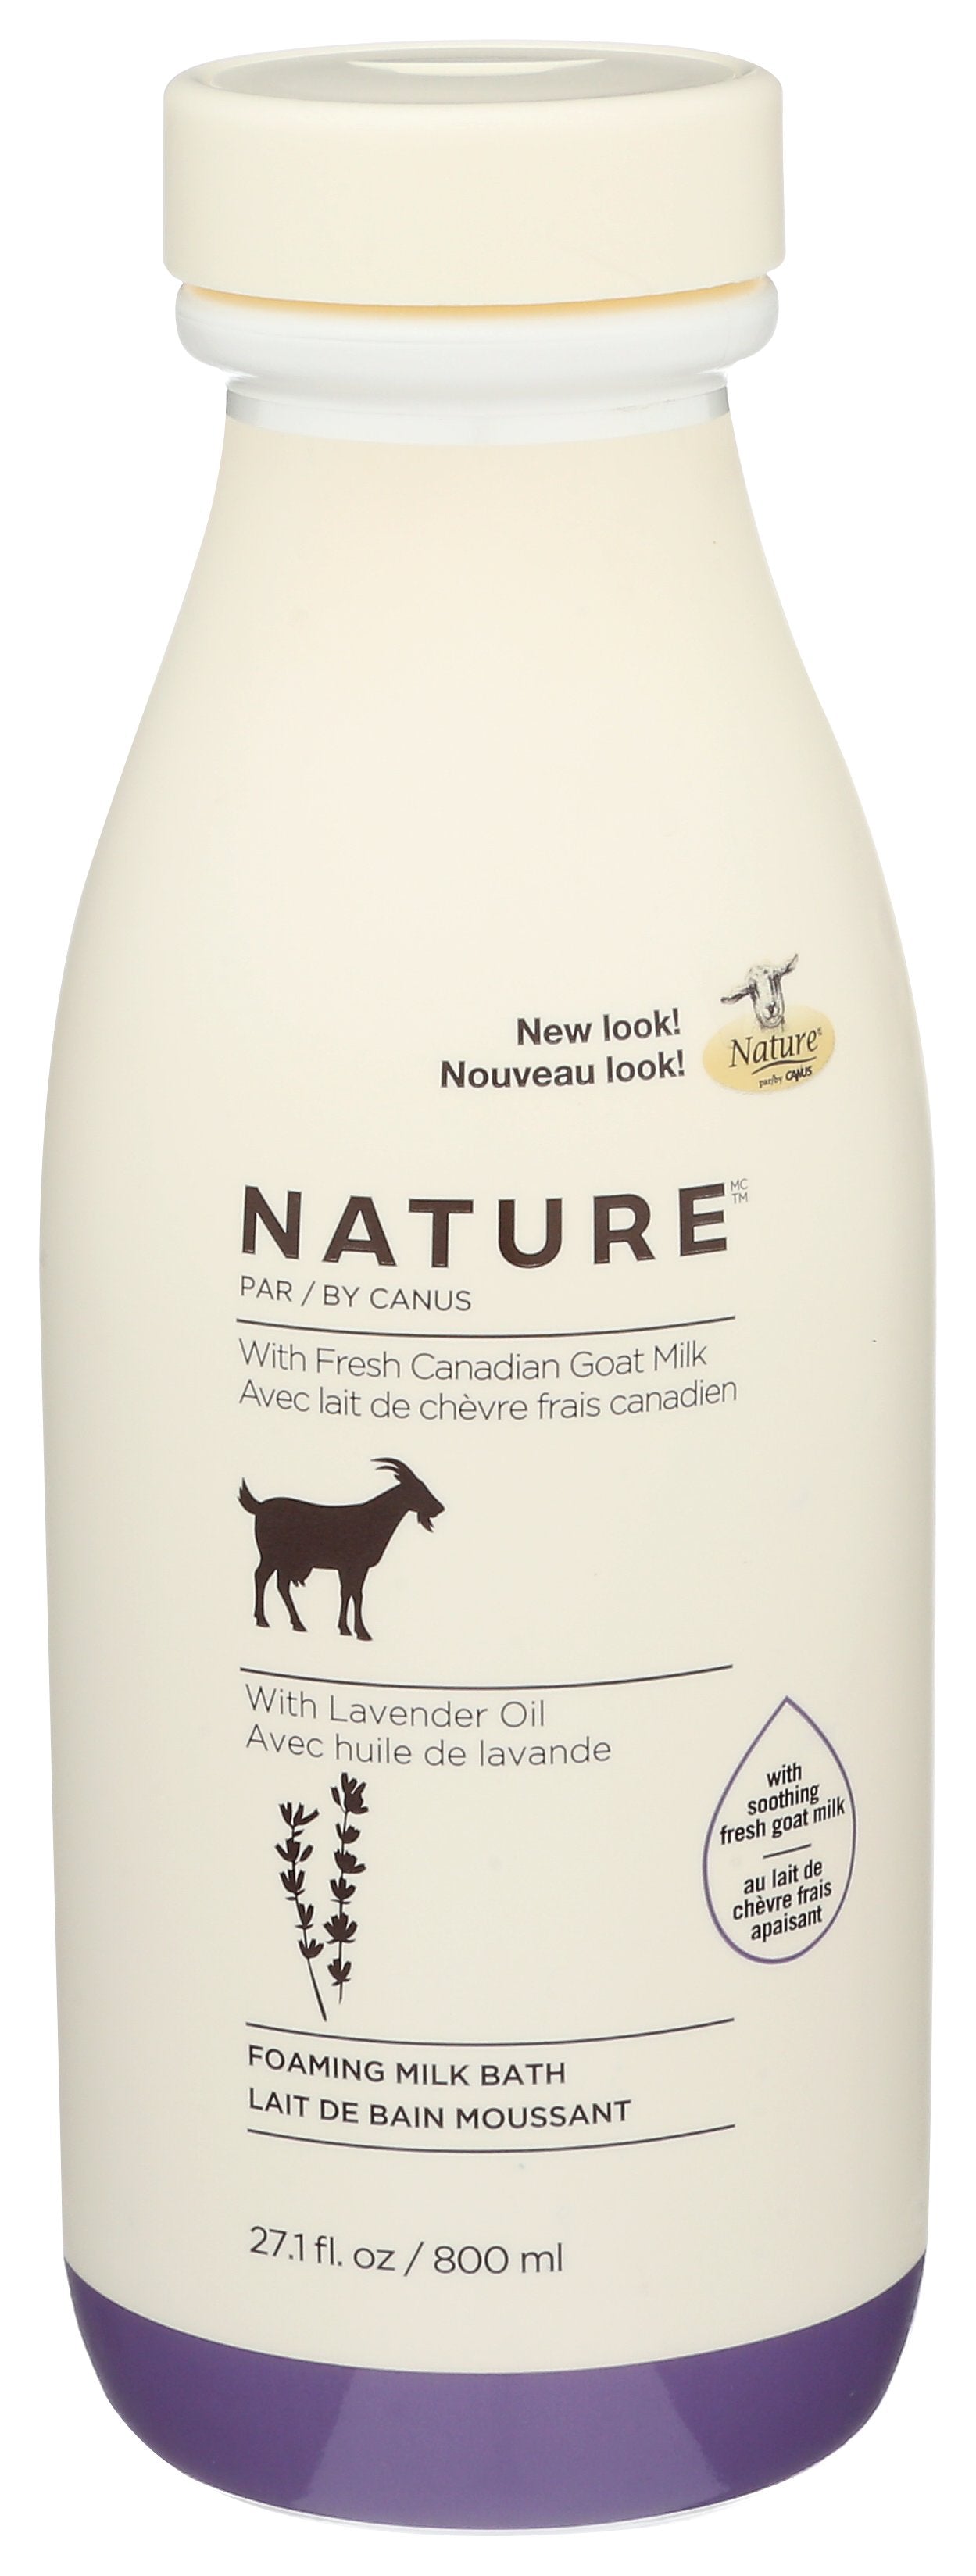 NATURE BY CANUS BATH MILK FOAMG LAVNDR - Case of 3